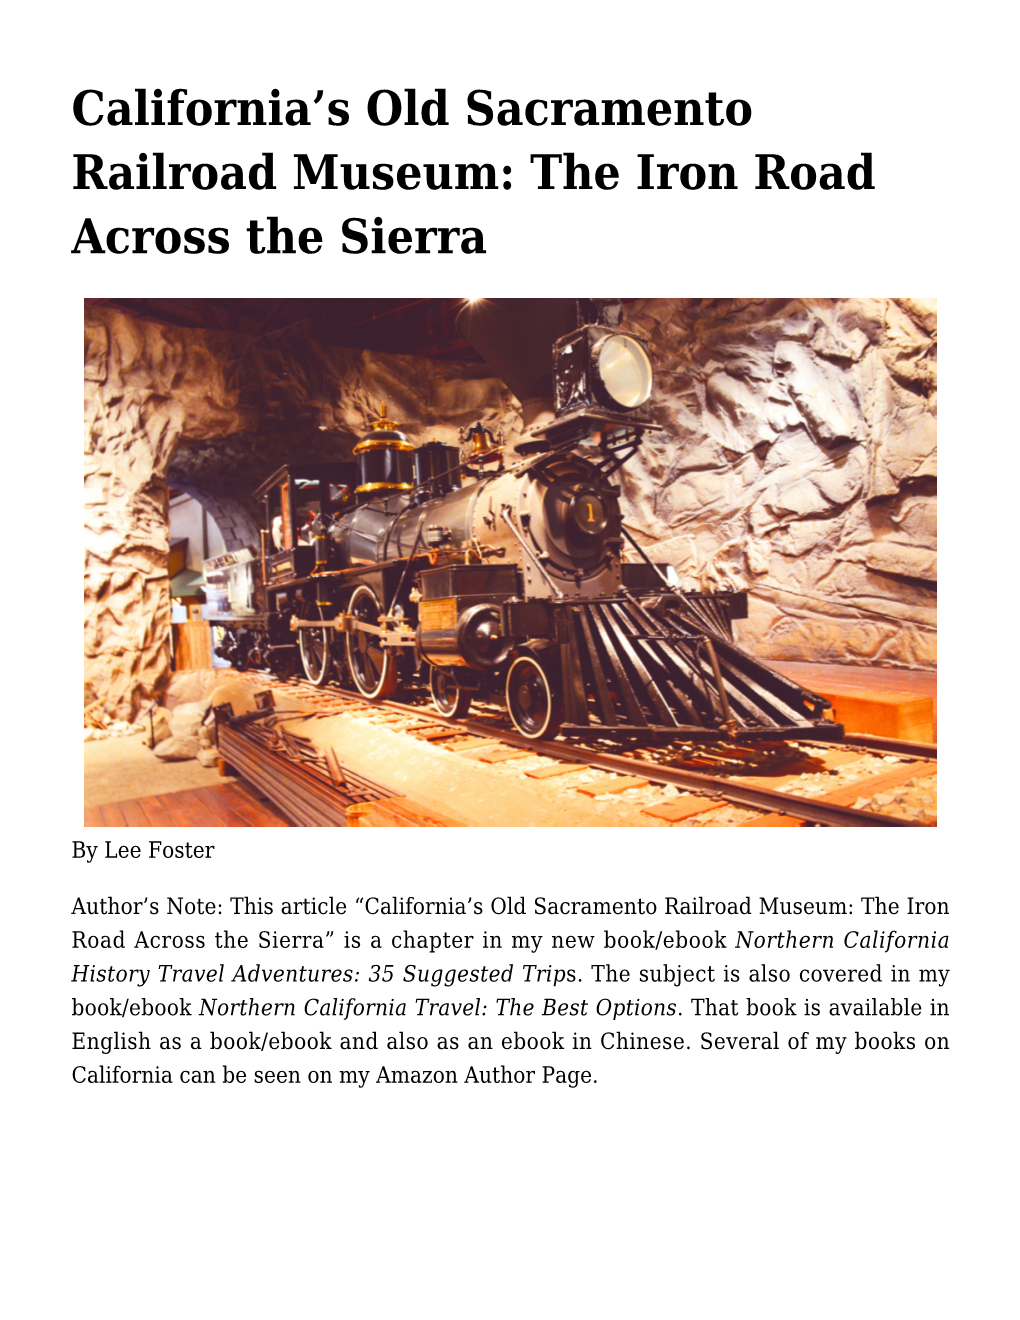 S Old Sacramento Railroad Museum: the Iron Road Across the Sierra